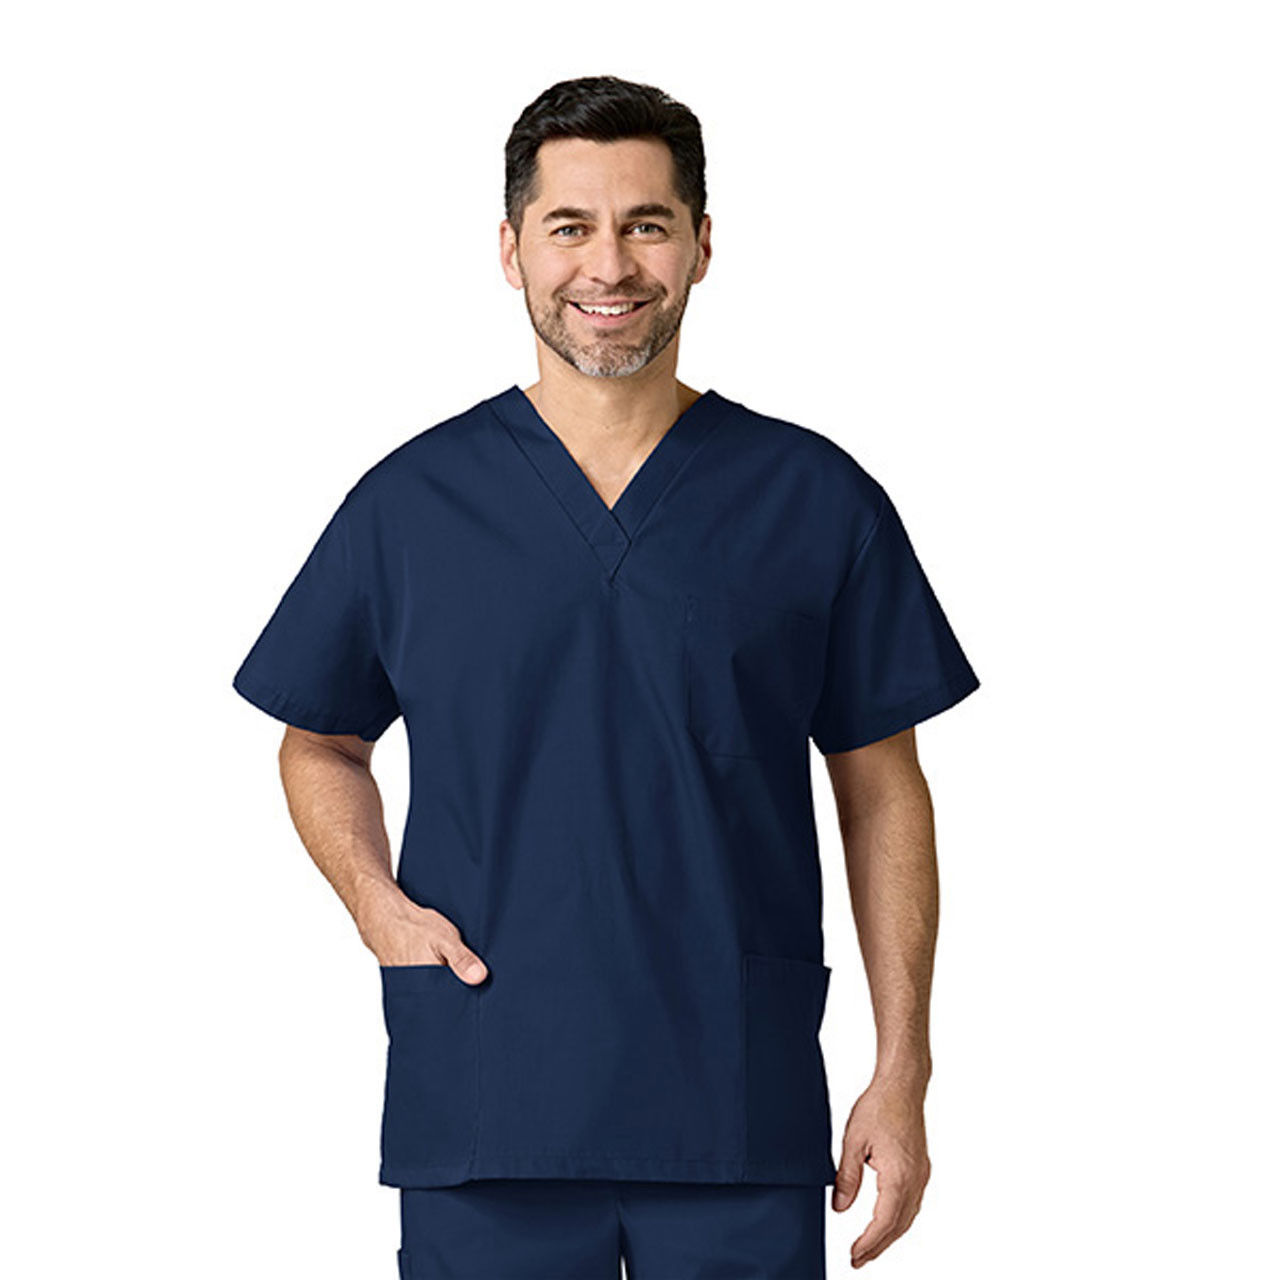 What type of sleeve does the Navy Blue Scrub Top have?